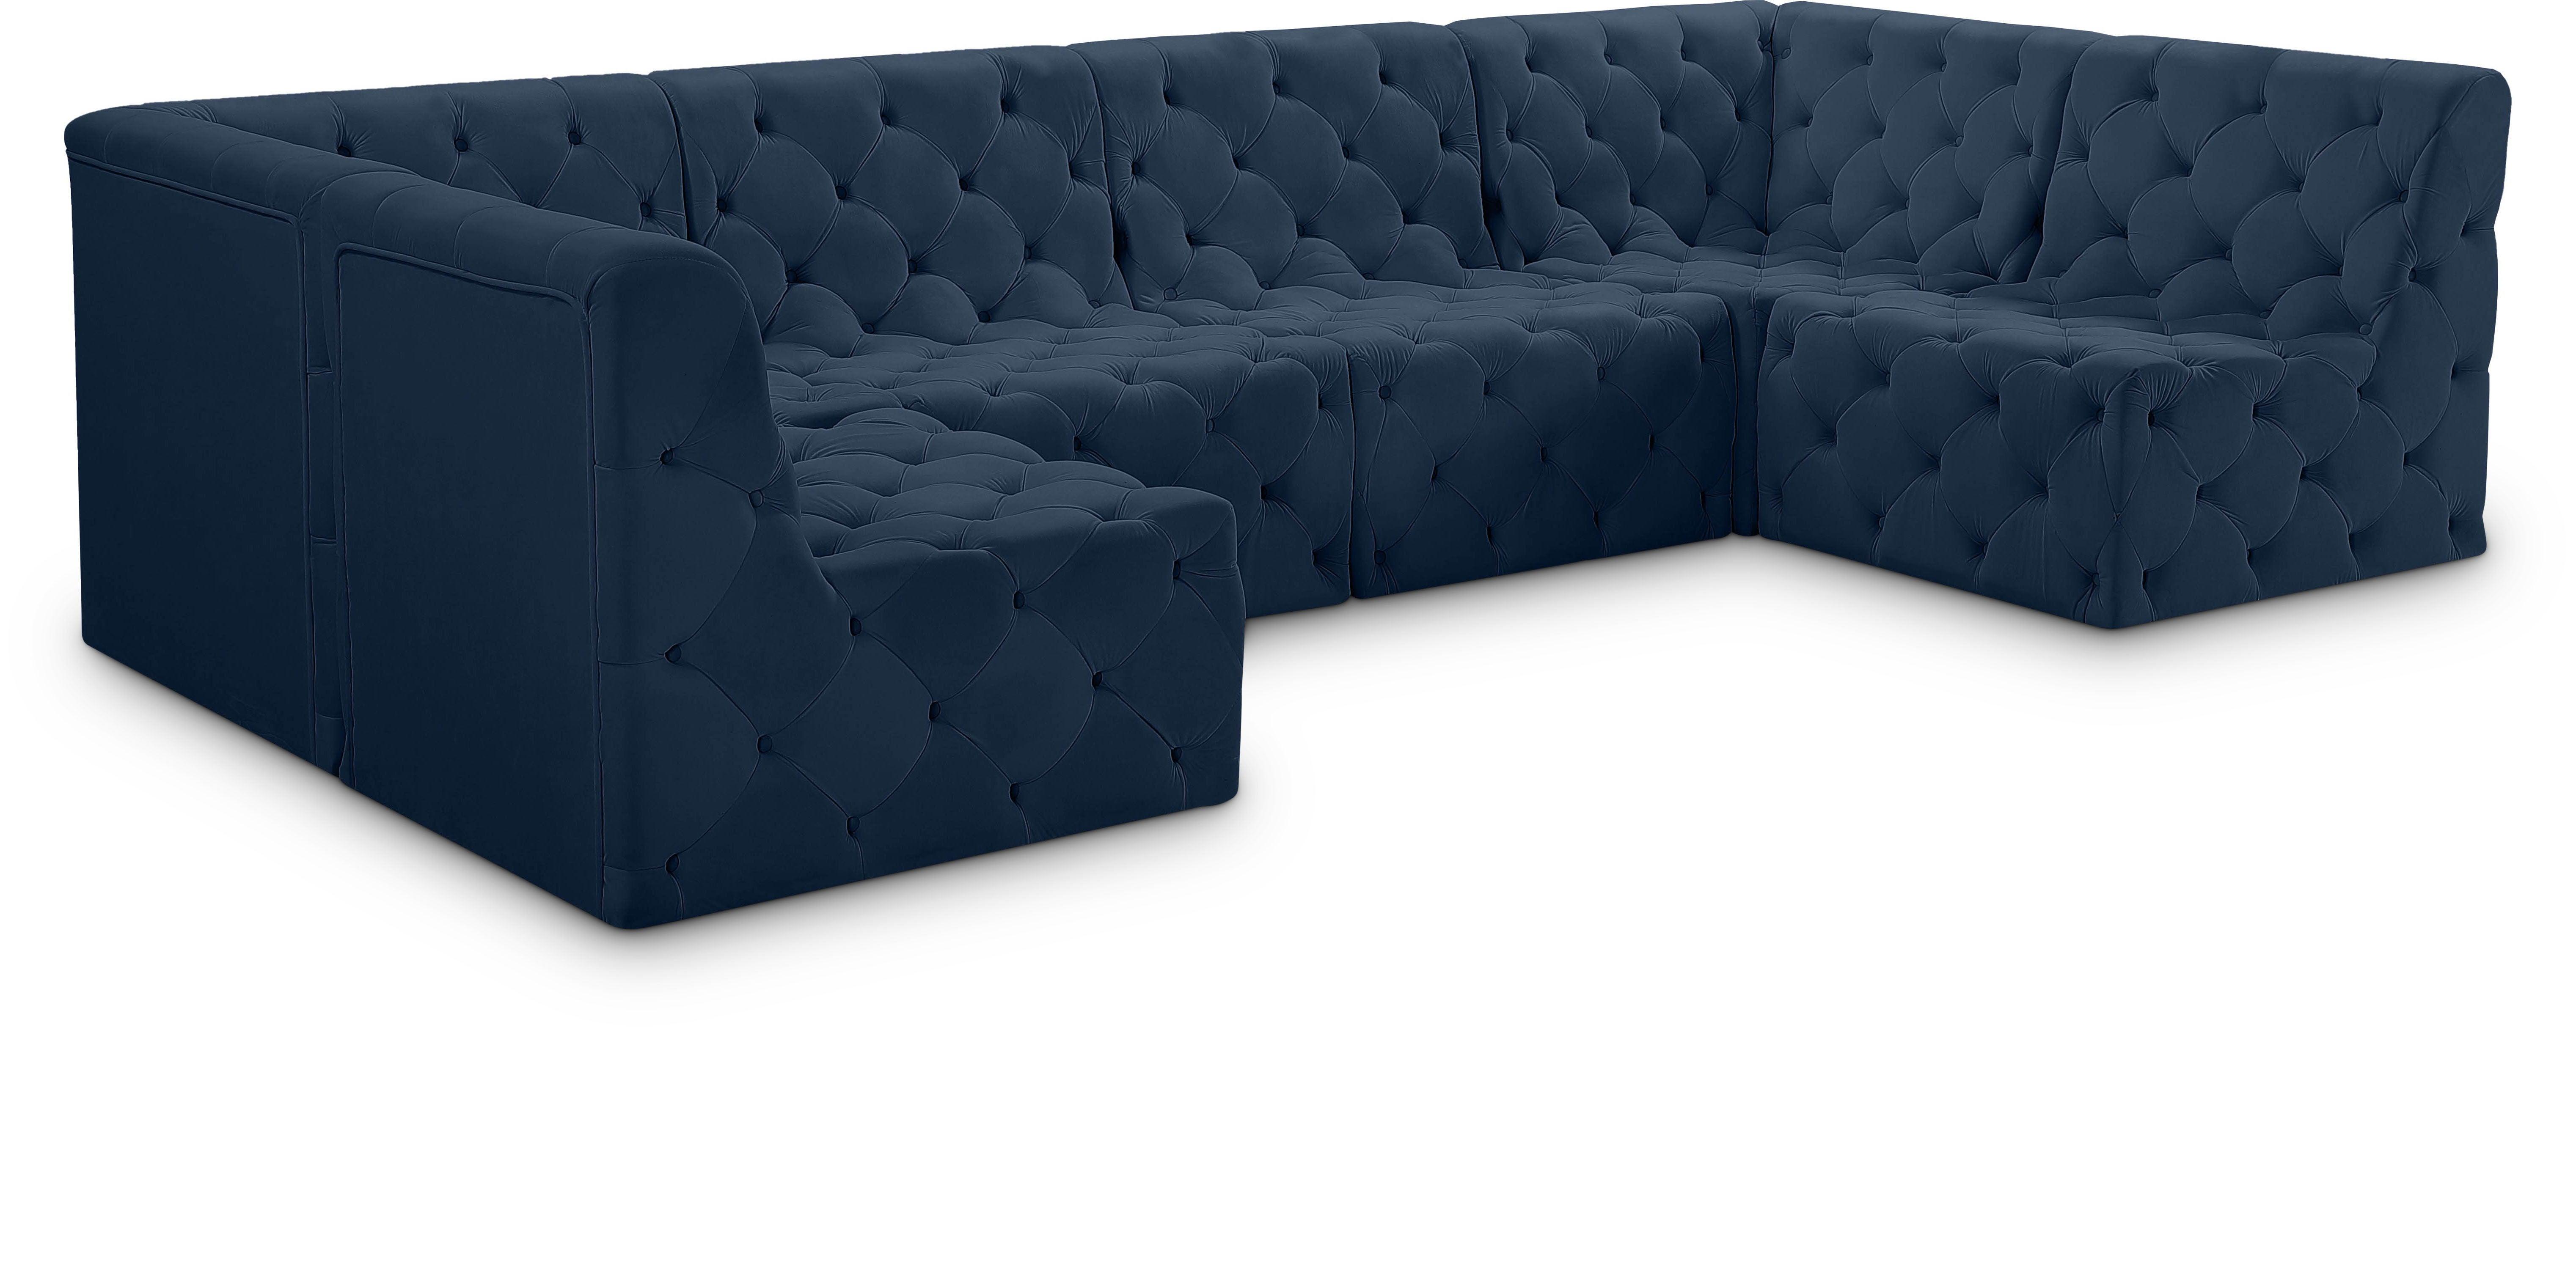 Meridian Furniture - Tuft - Modular Sectional 6 Piece - Navy - Modern & Contemporary - 5th Avenue Furniture